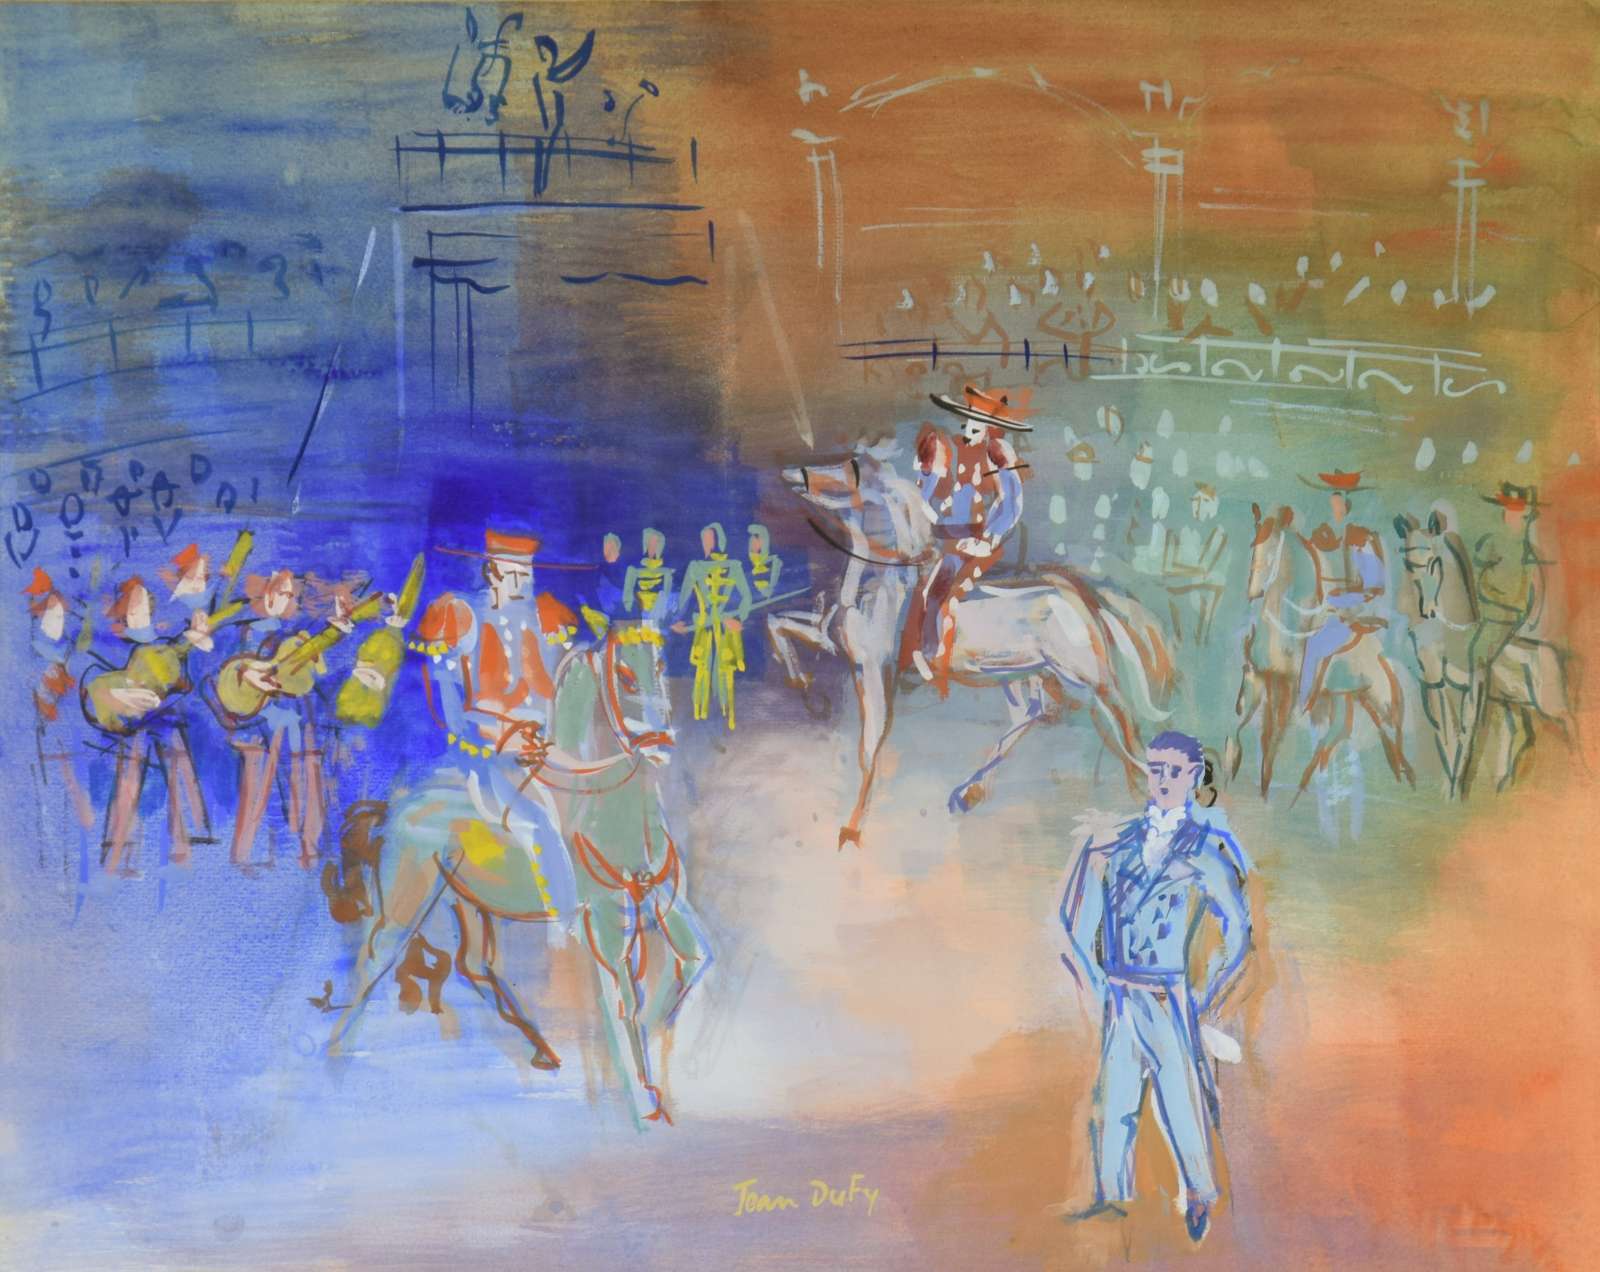 JEAN DUFY, Parade Mexicaine, Gouache on Ingres paper, 45.1 x 55.6 cm (173/4 x 217/8 inches), Signed lower centre, Jean Dufy, Executed circa 1948-1950